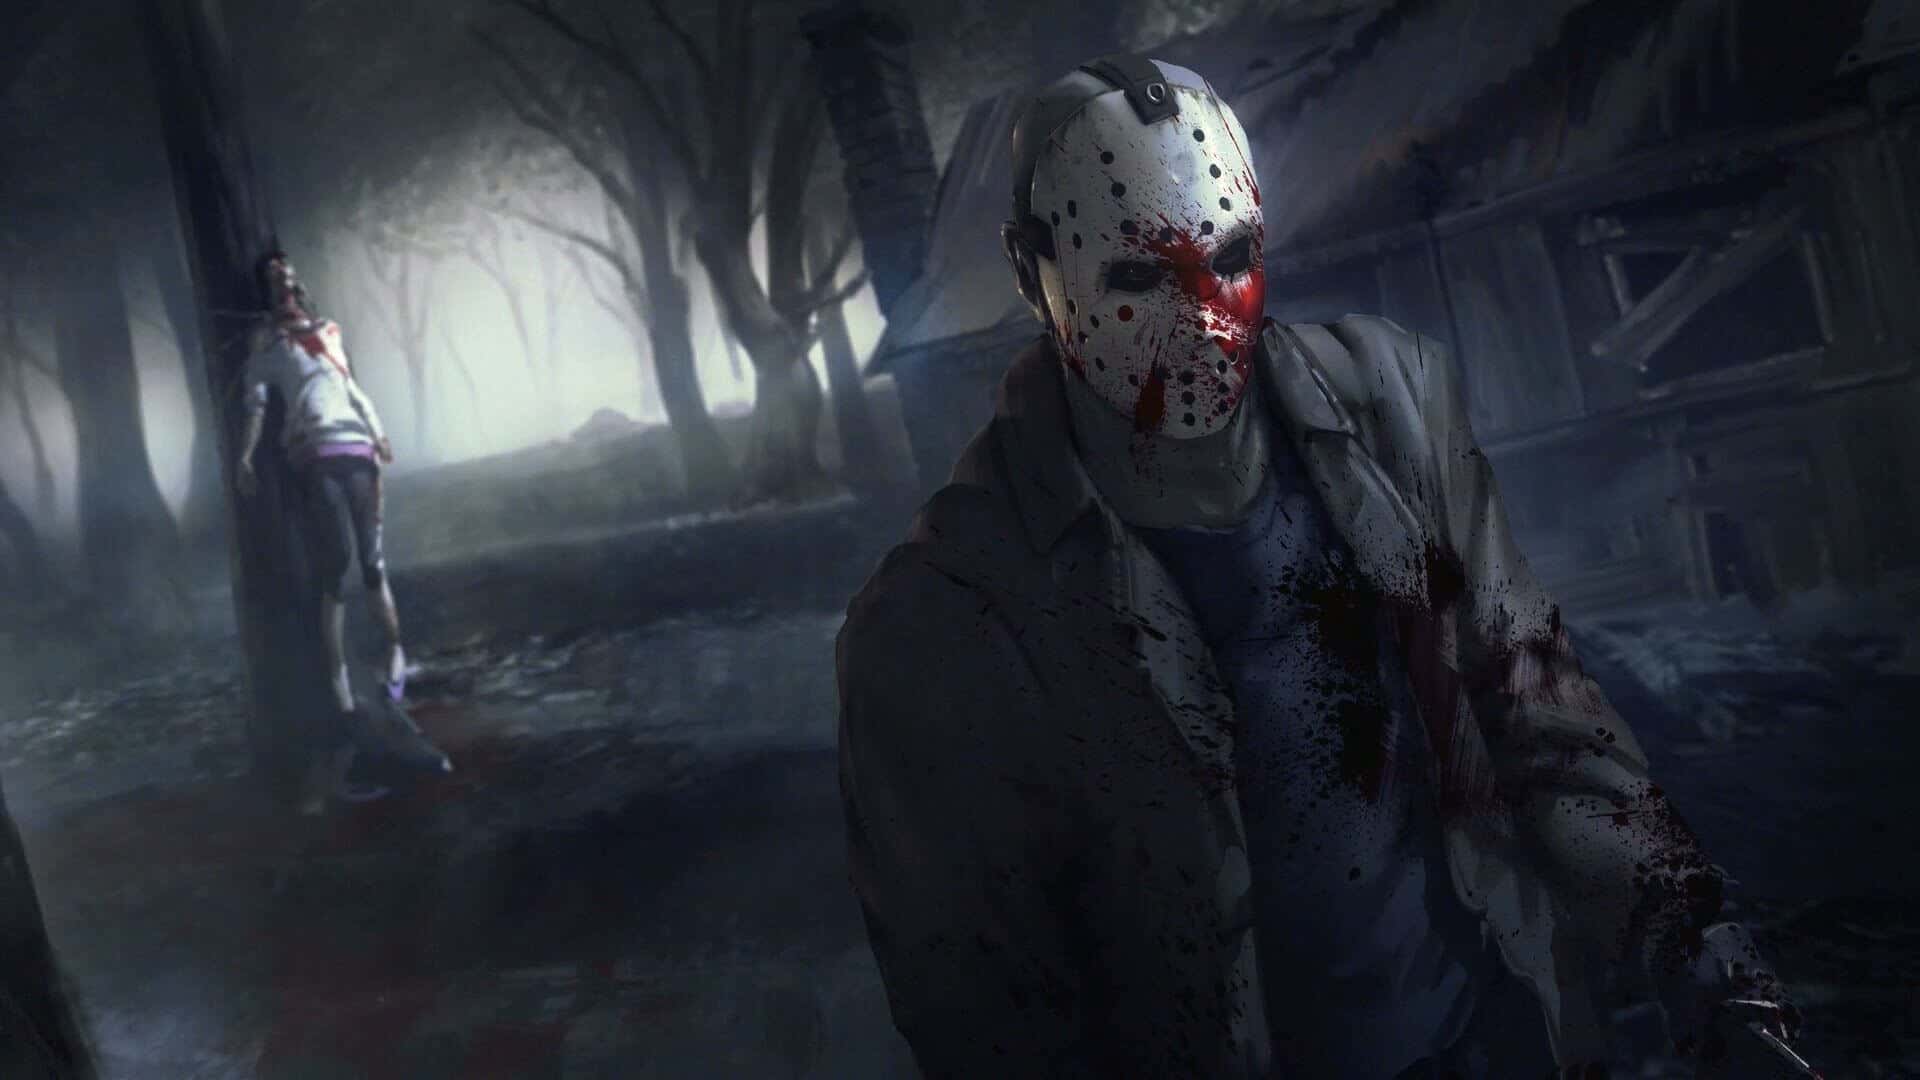 Friday the 13th The Game download free